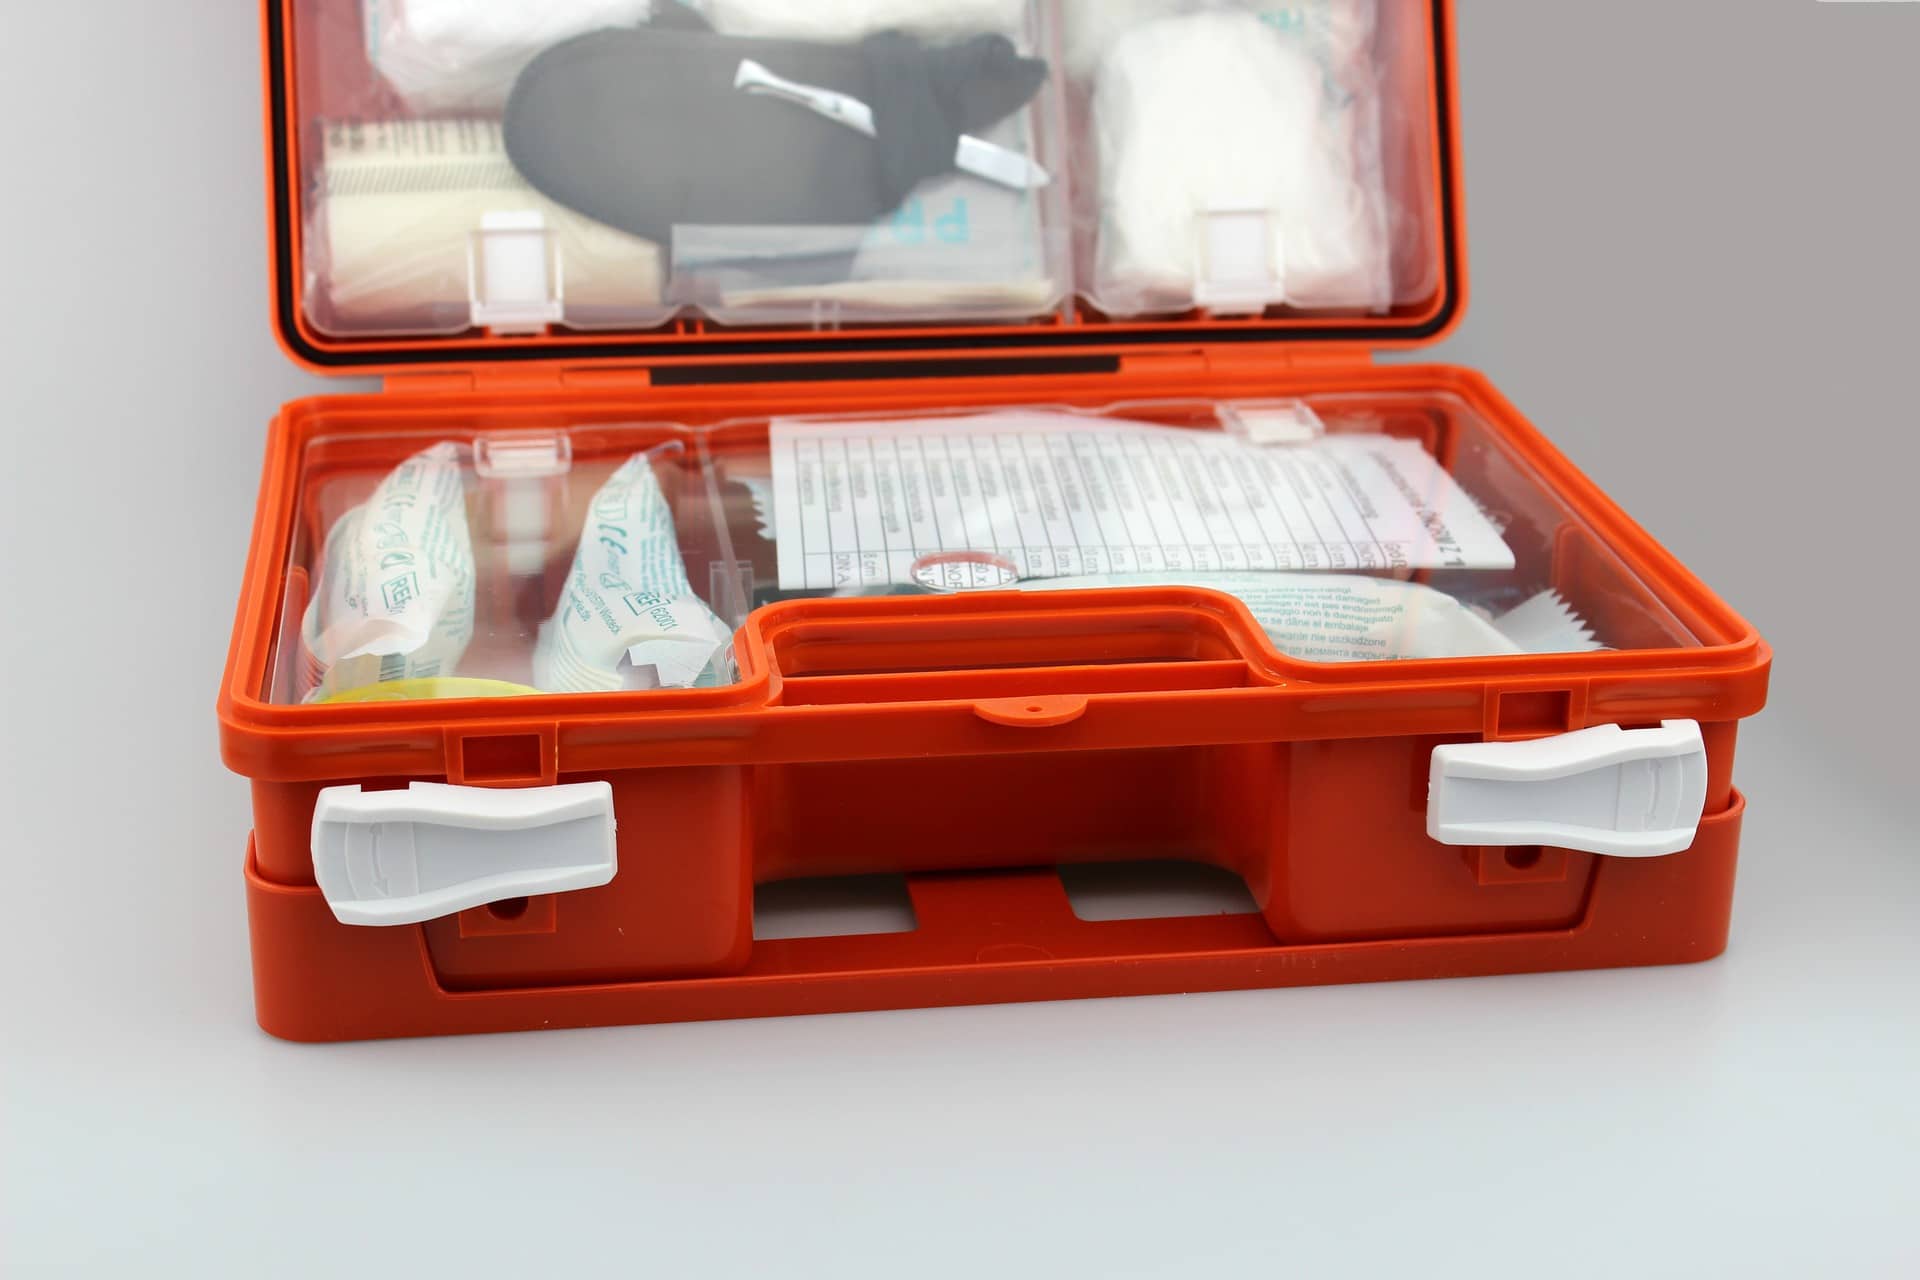 A first-aid kit open to reveal its contents.